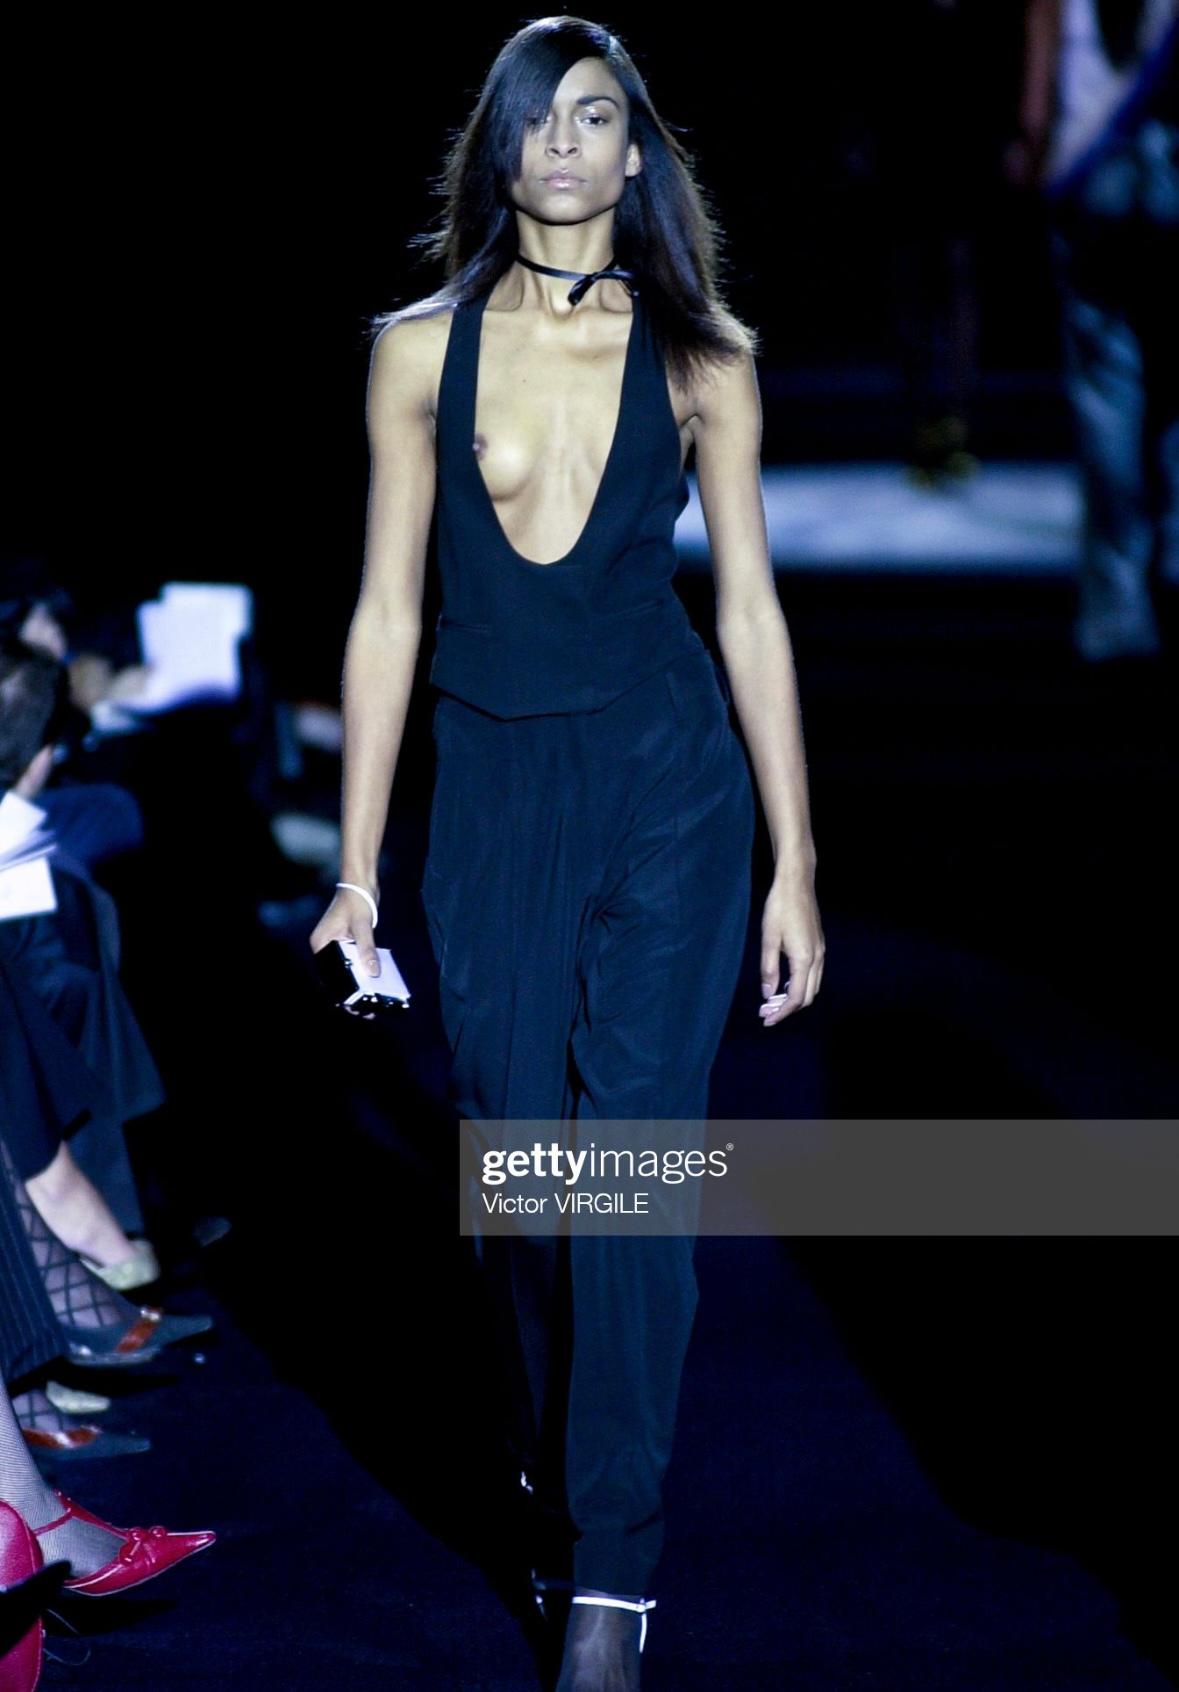 Presenting a stunning black Yves Saint Laurent Rive Gauche vest top, designed by Tom Ford. From Ford's first collection at YSL, this Spring/Summer 2001 collection top debuted on the season's runway as part of look 5. This ultra-chic top features a